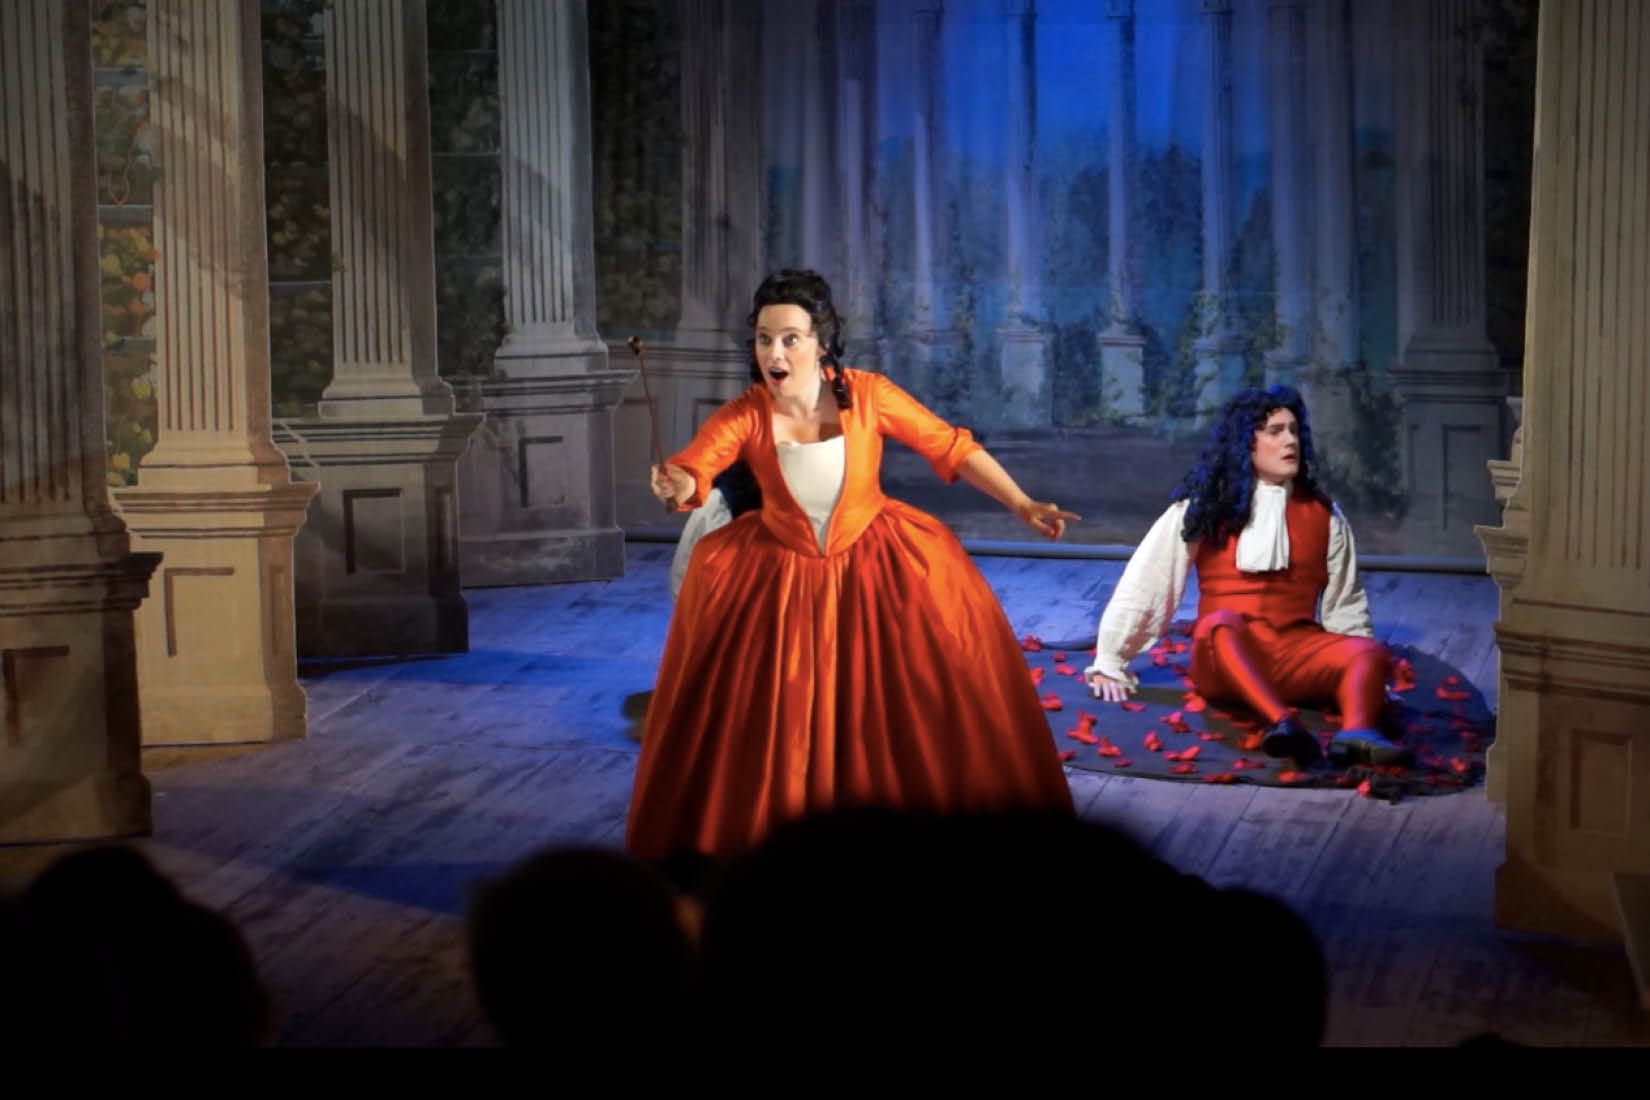 Annastina Malm, opera singer, singing on stage in an orange dress, with a man sitting on the floor in the background.